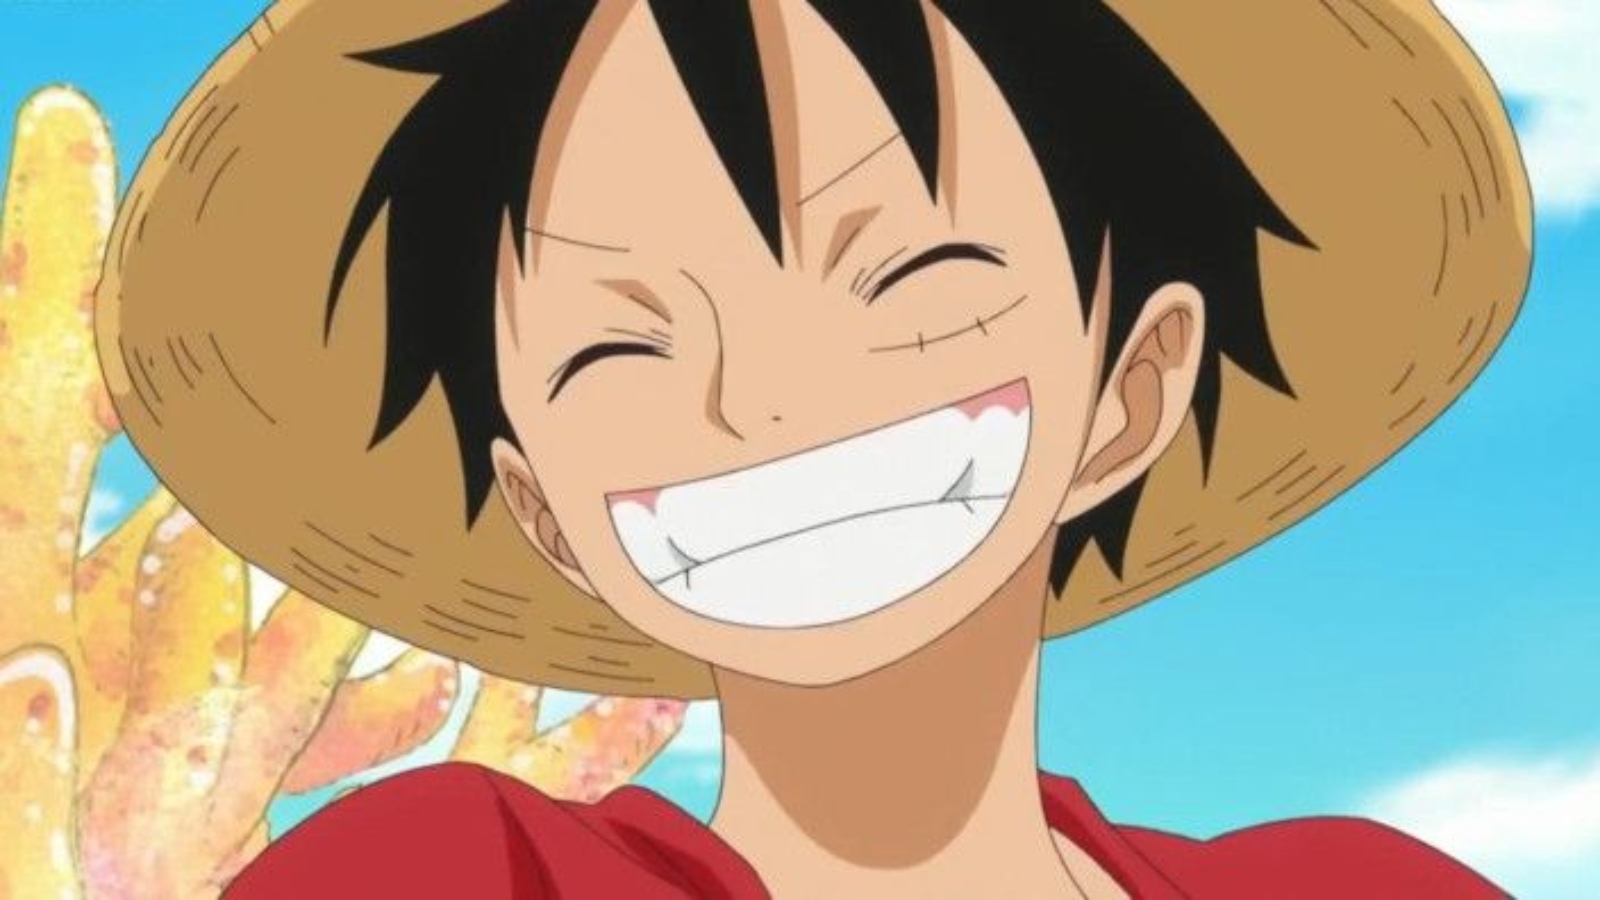 Monkey D. Luffy from One Piece grinning